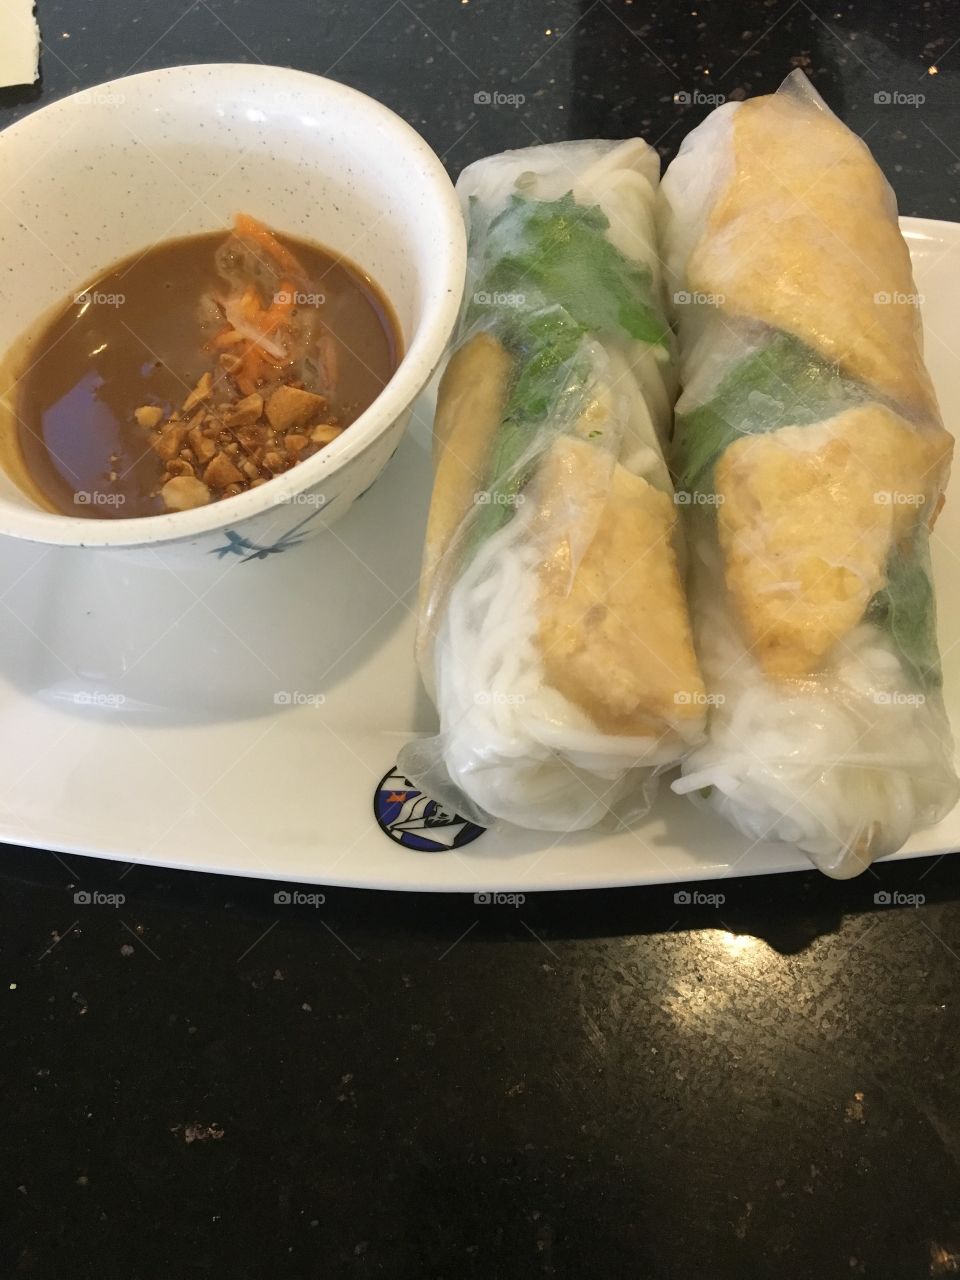 Tastes of Vietnam always make my tummy rumble with excitement. The peanut sauce and the greens and tofu wrapped in this rice roll are yummy! This is a great dish for Vegetarians.